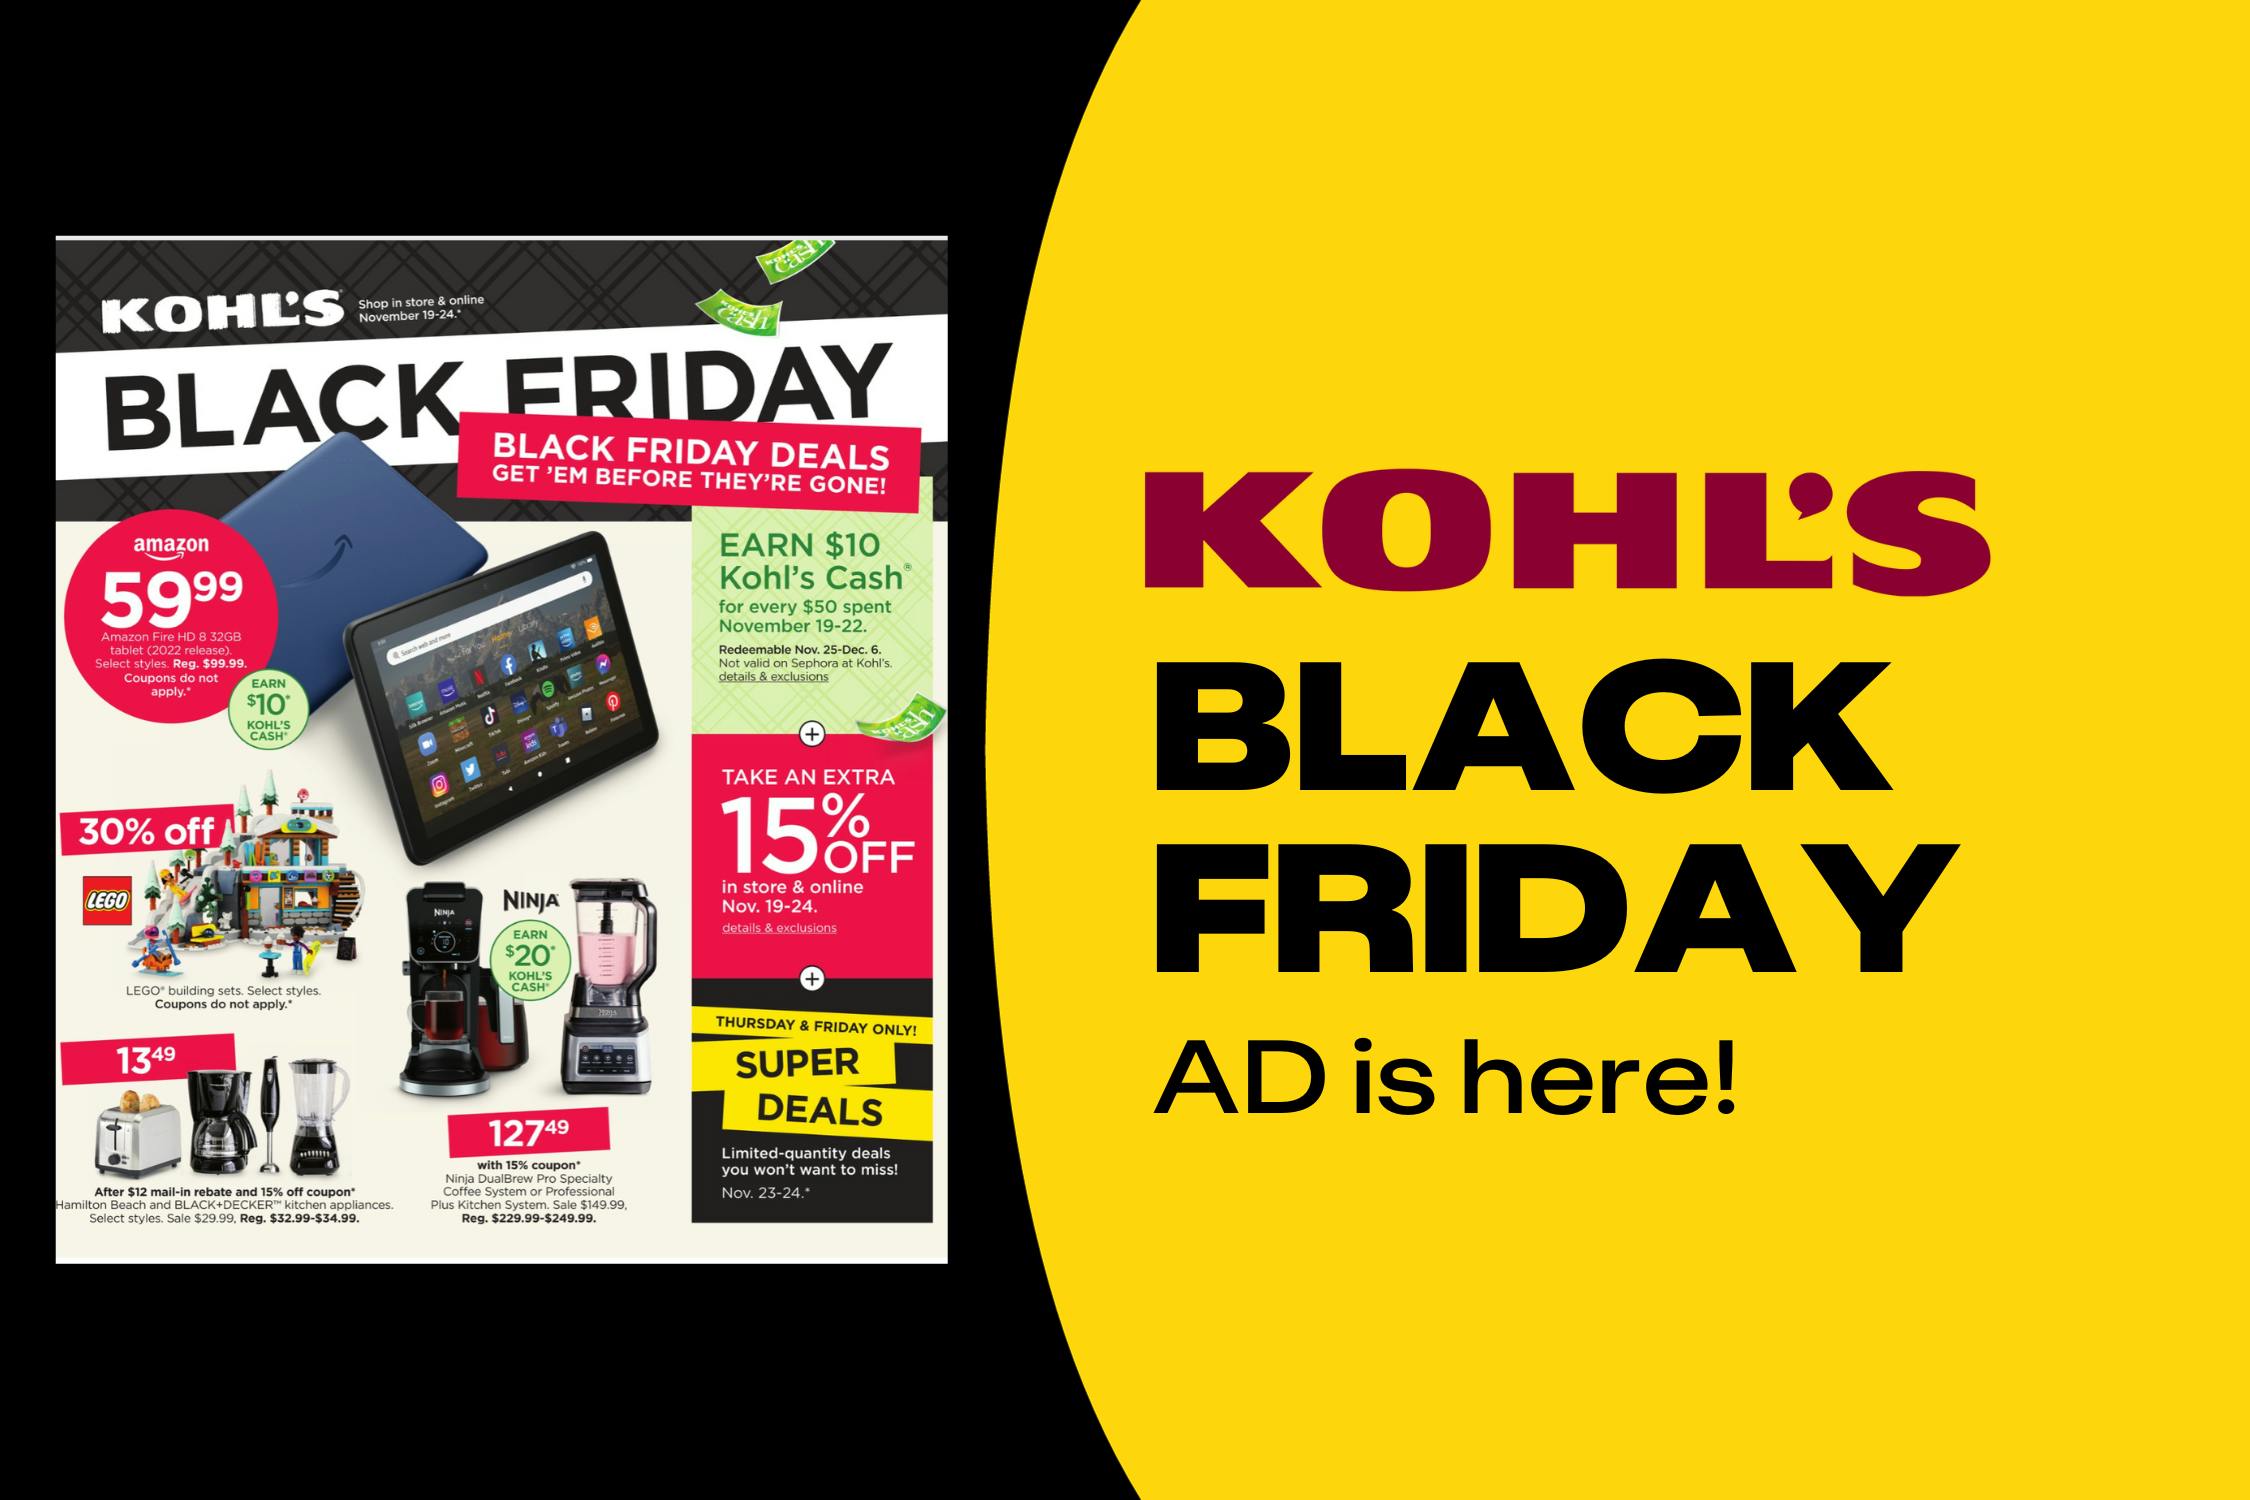 25 Easy Ways to Shop Smarter at Kohl's - The Krazy Coupon Lady